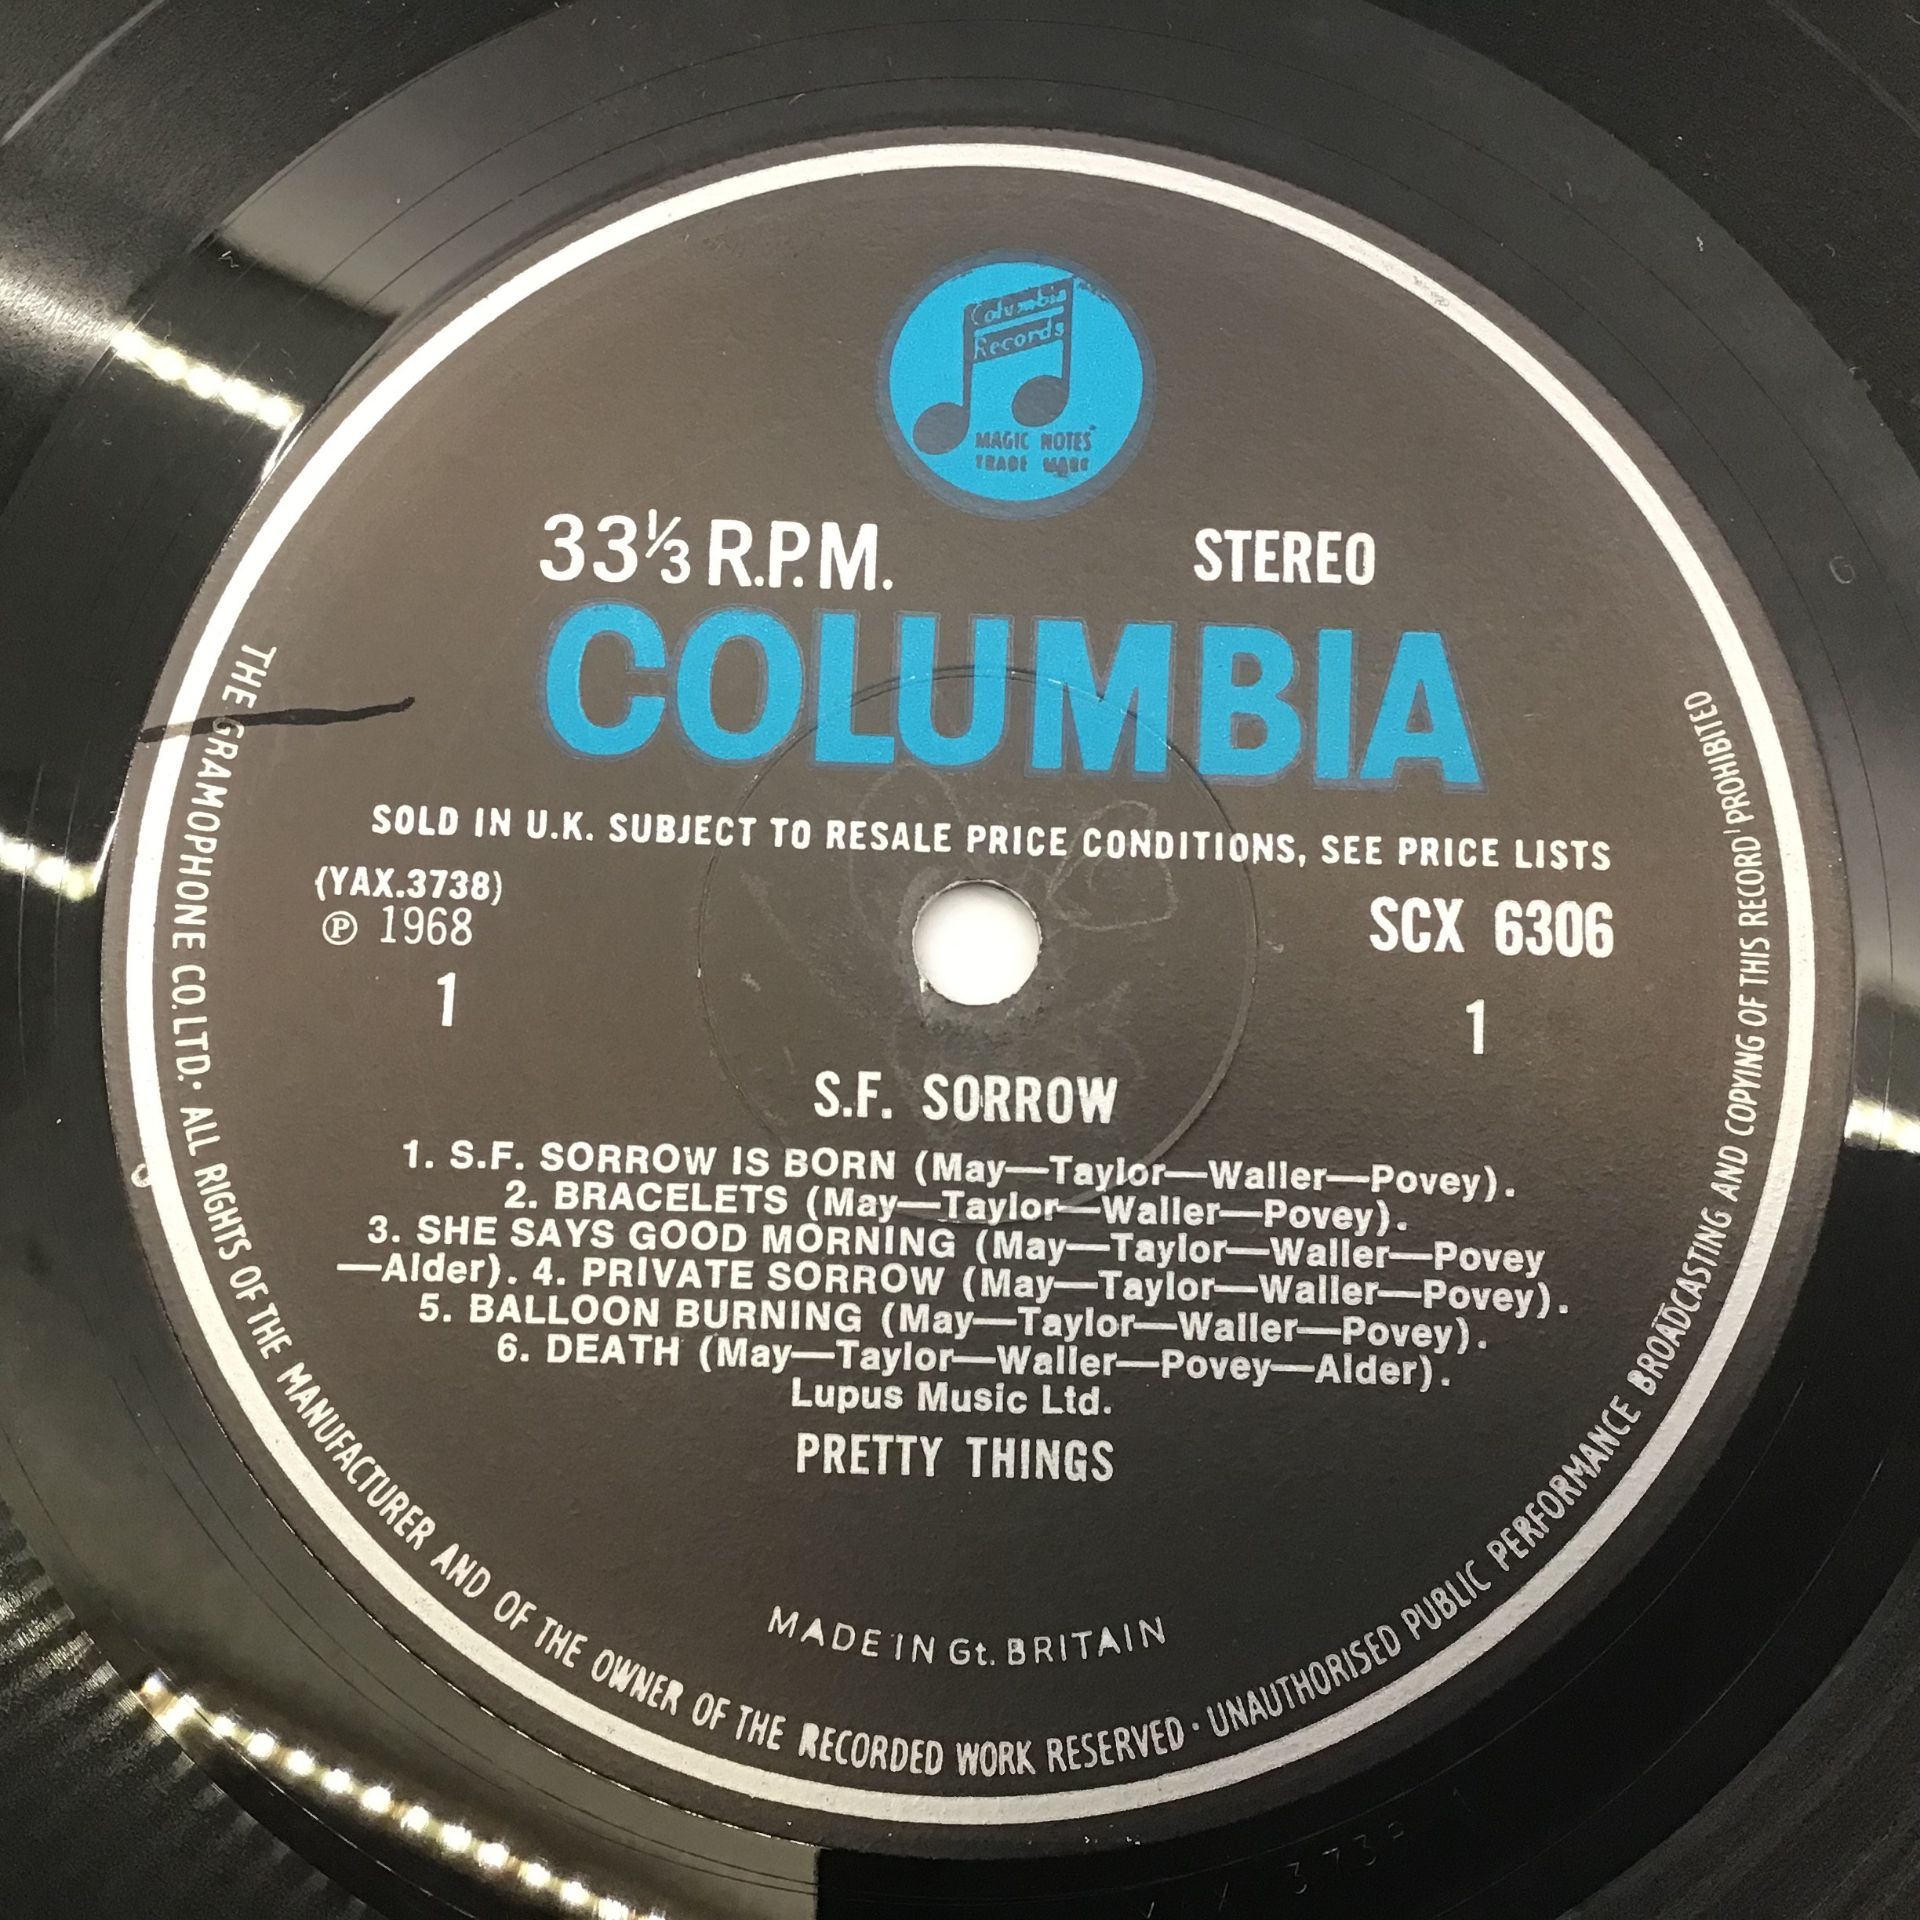 PRETTY THINGS ‘S.F. SORROW’ LP RECORD. Pressed here on Columbia Records from 1968. This stereo - Image 7 of 10